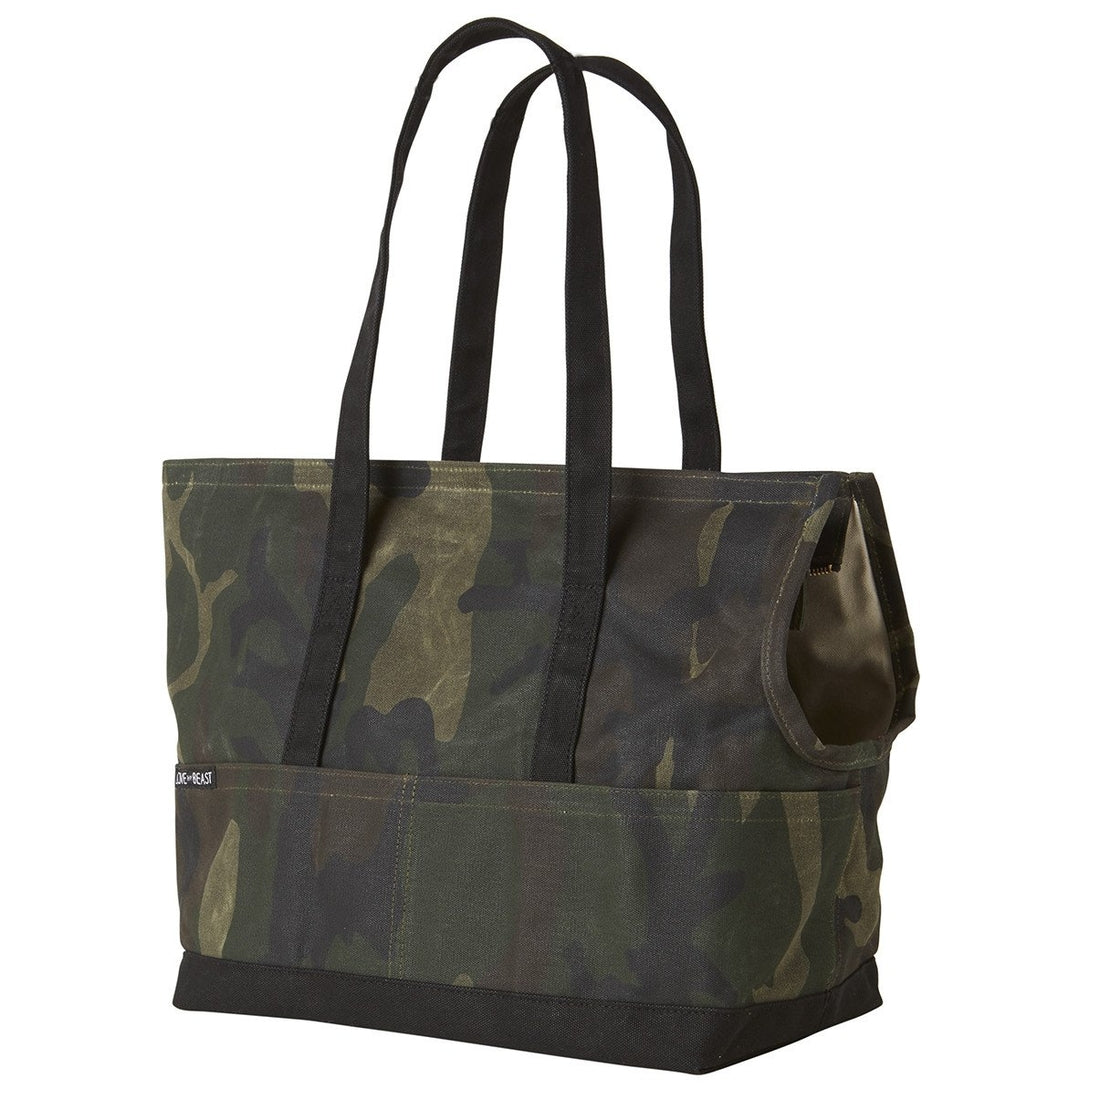 Waxed 100% waterproof Camo Tote Carrier - Carrier - Holler Brighton - Love Thy Beast